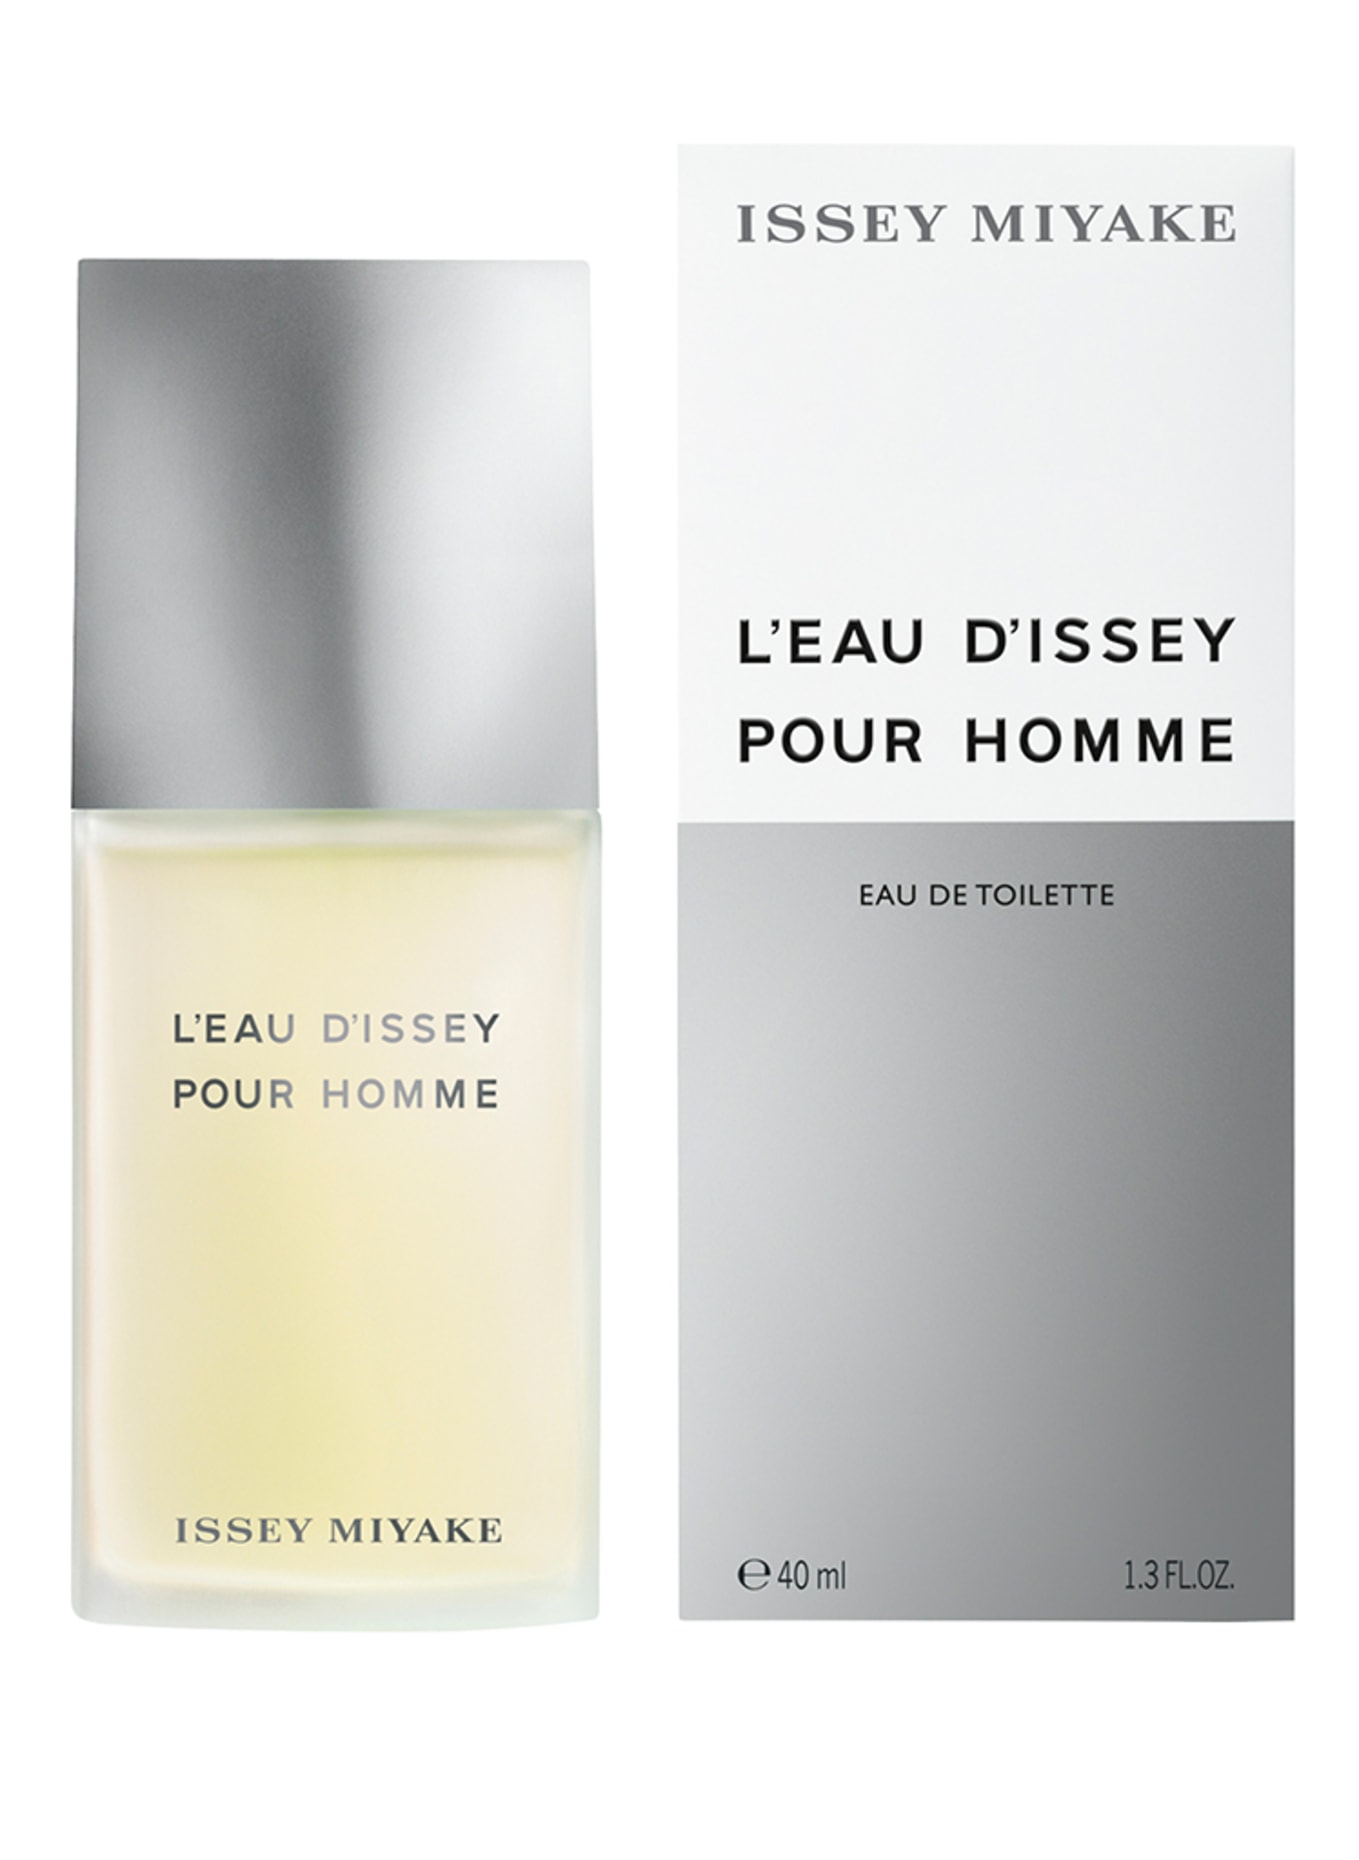 ISSEY MIYAKE L'EAU D'ISSEY POUR HOMME  (Bild 2)